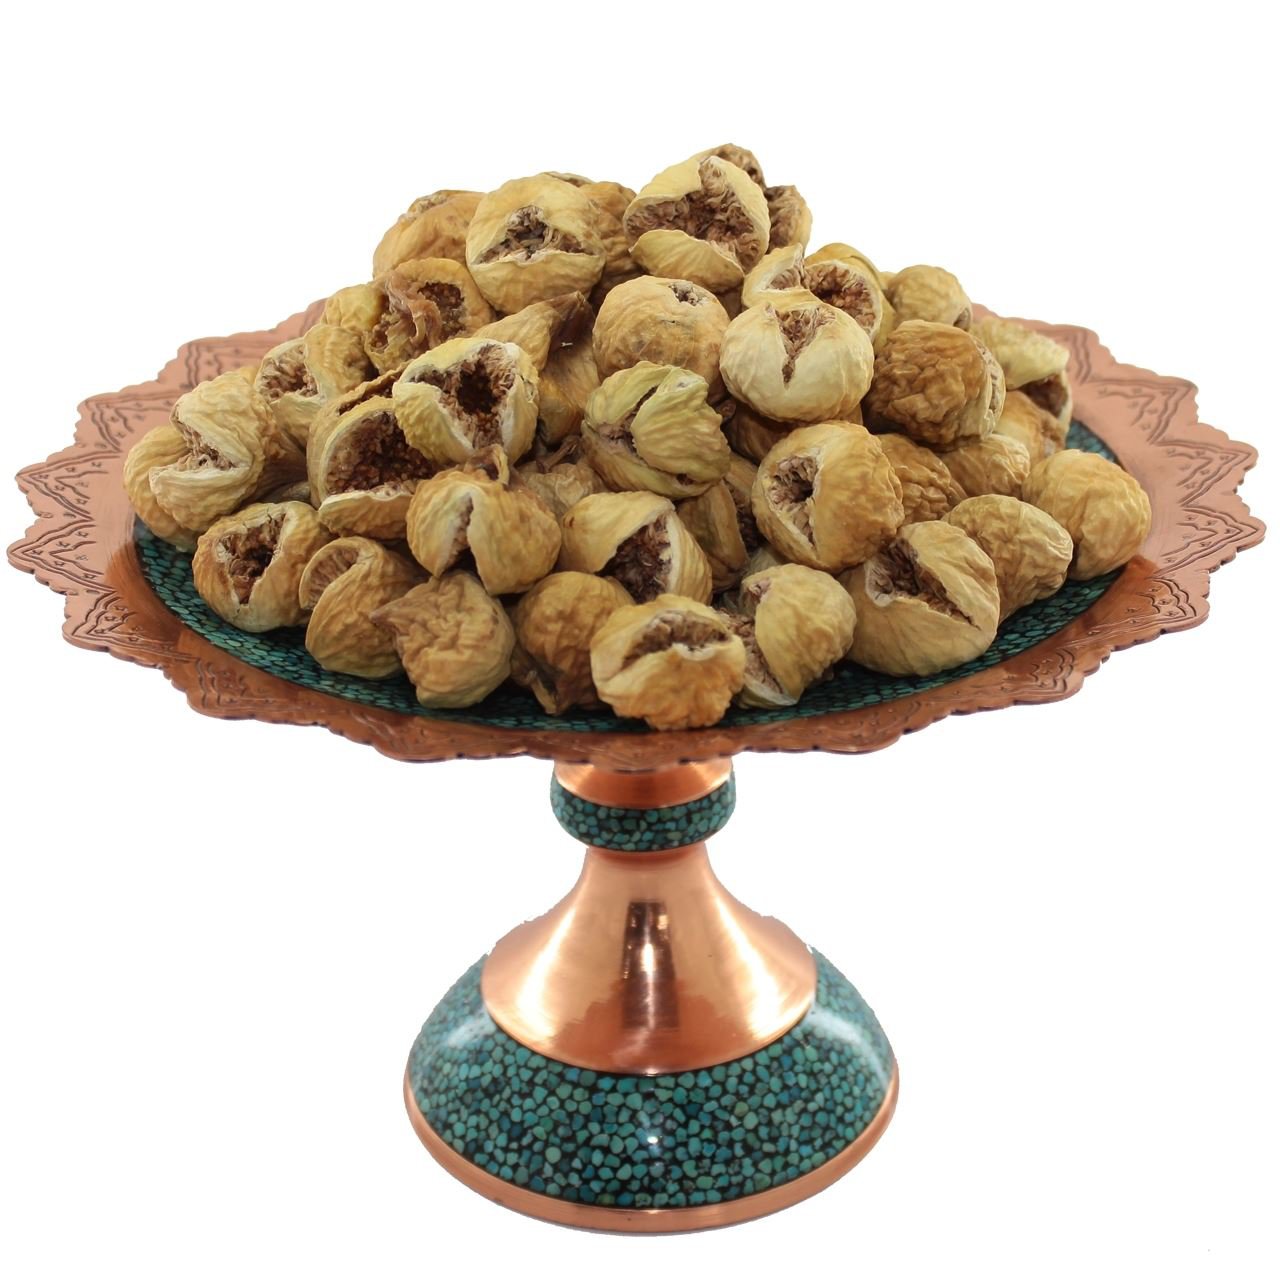 Premium large dried figs